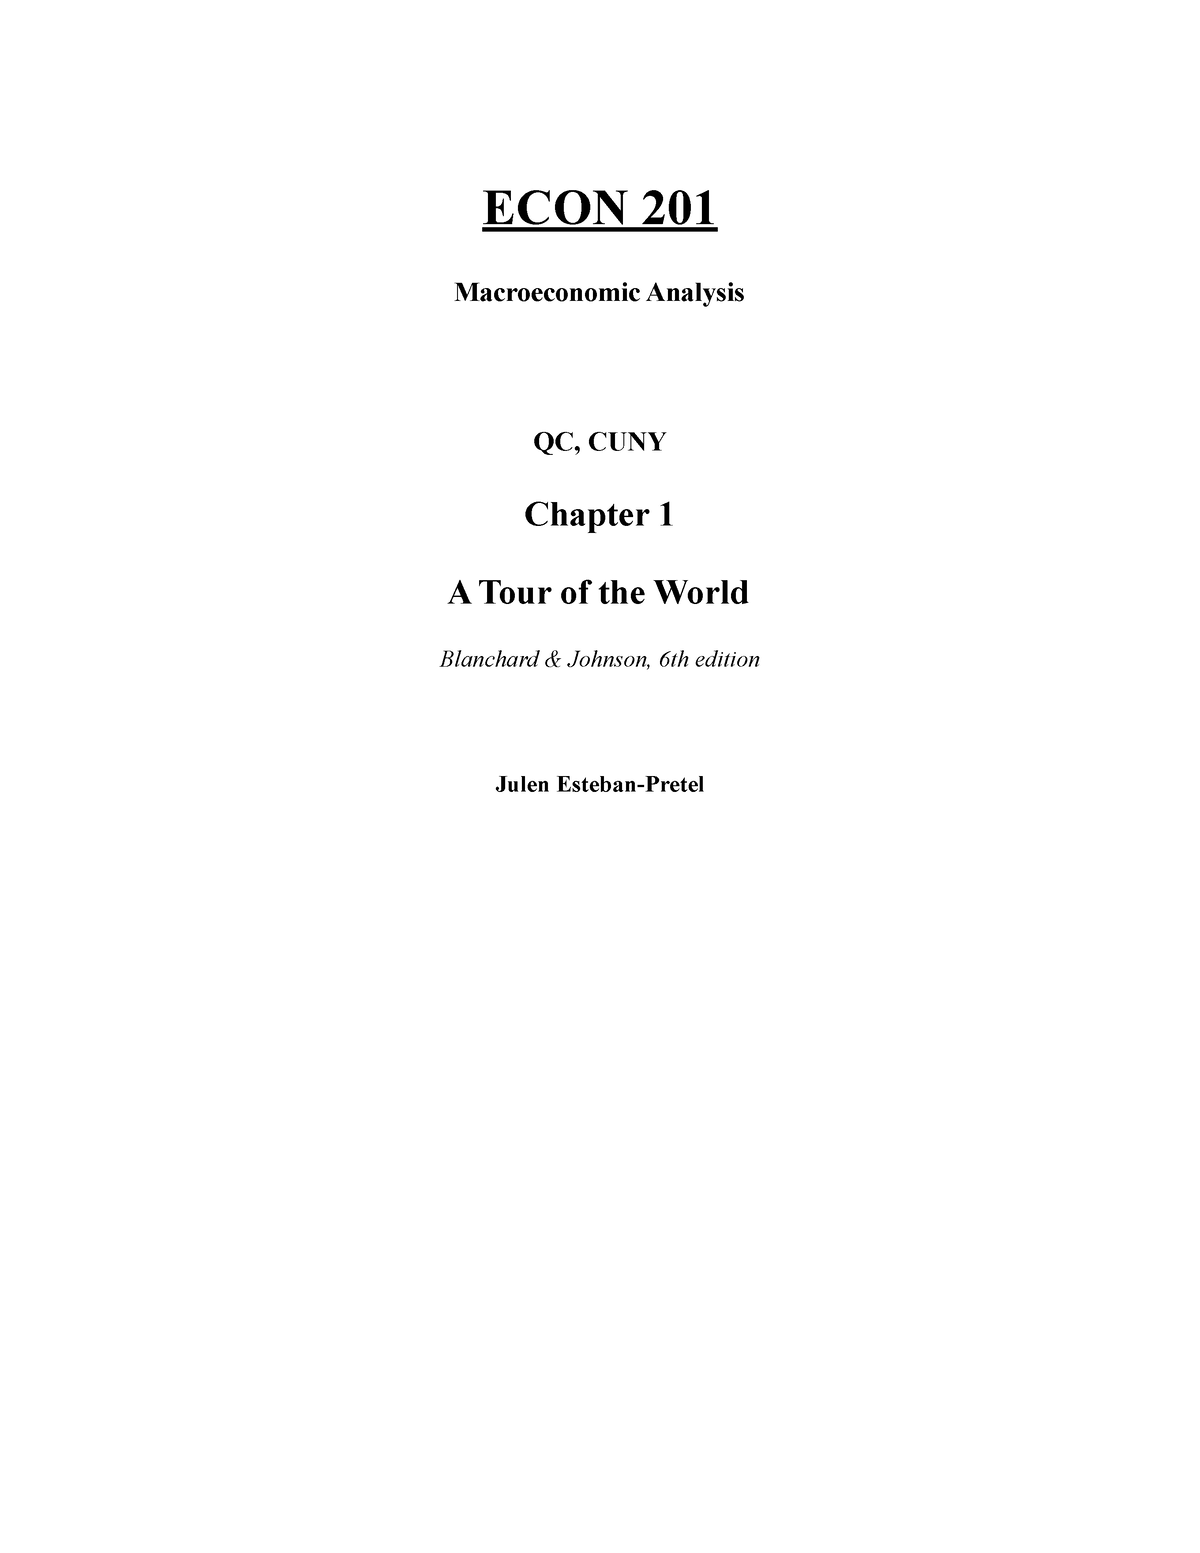 ECON 201 Notes ECON 201 Macroeconomic Analysis QC, CUNY Chapter 1 A